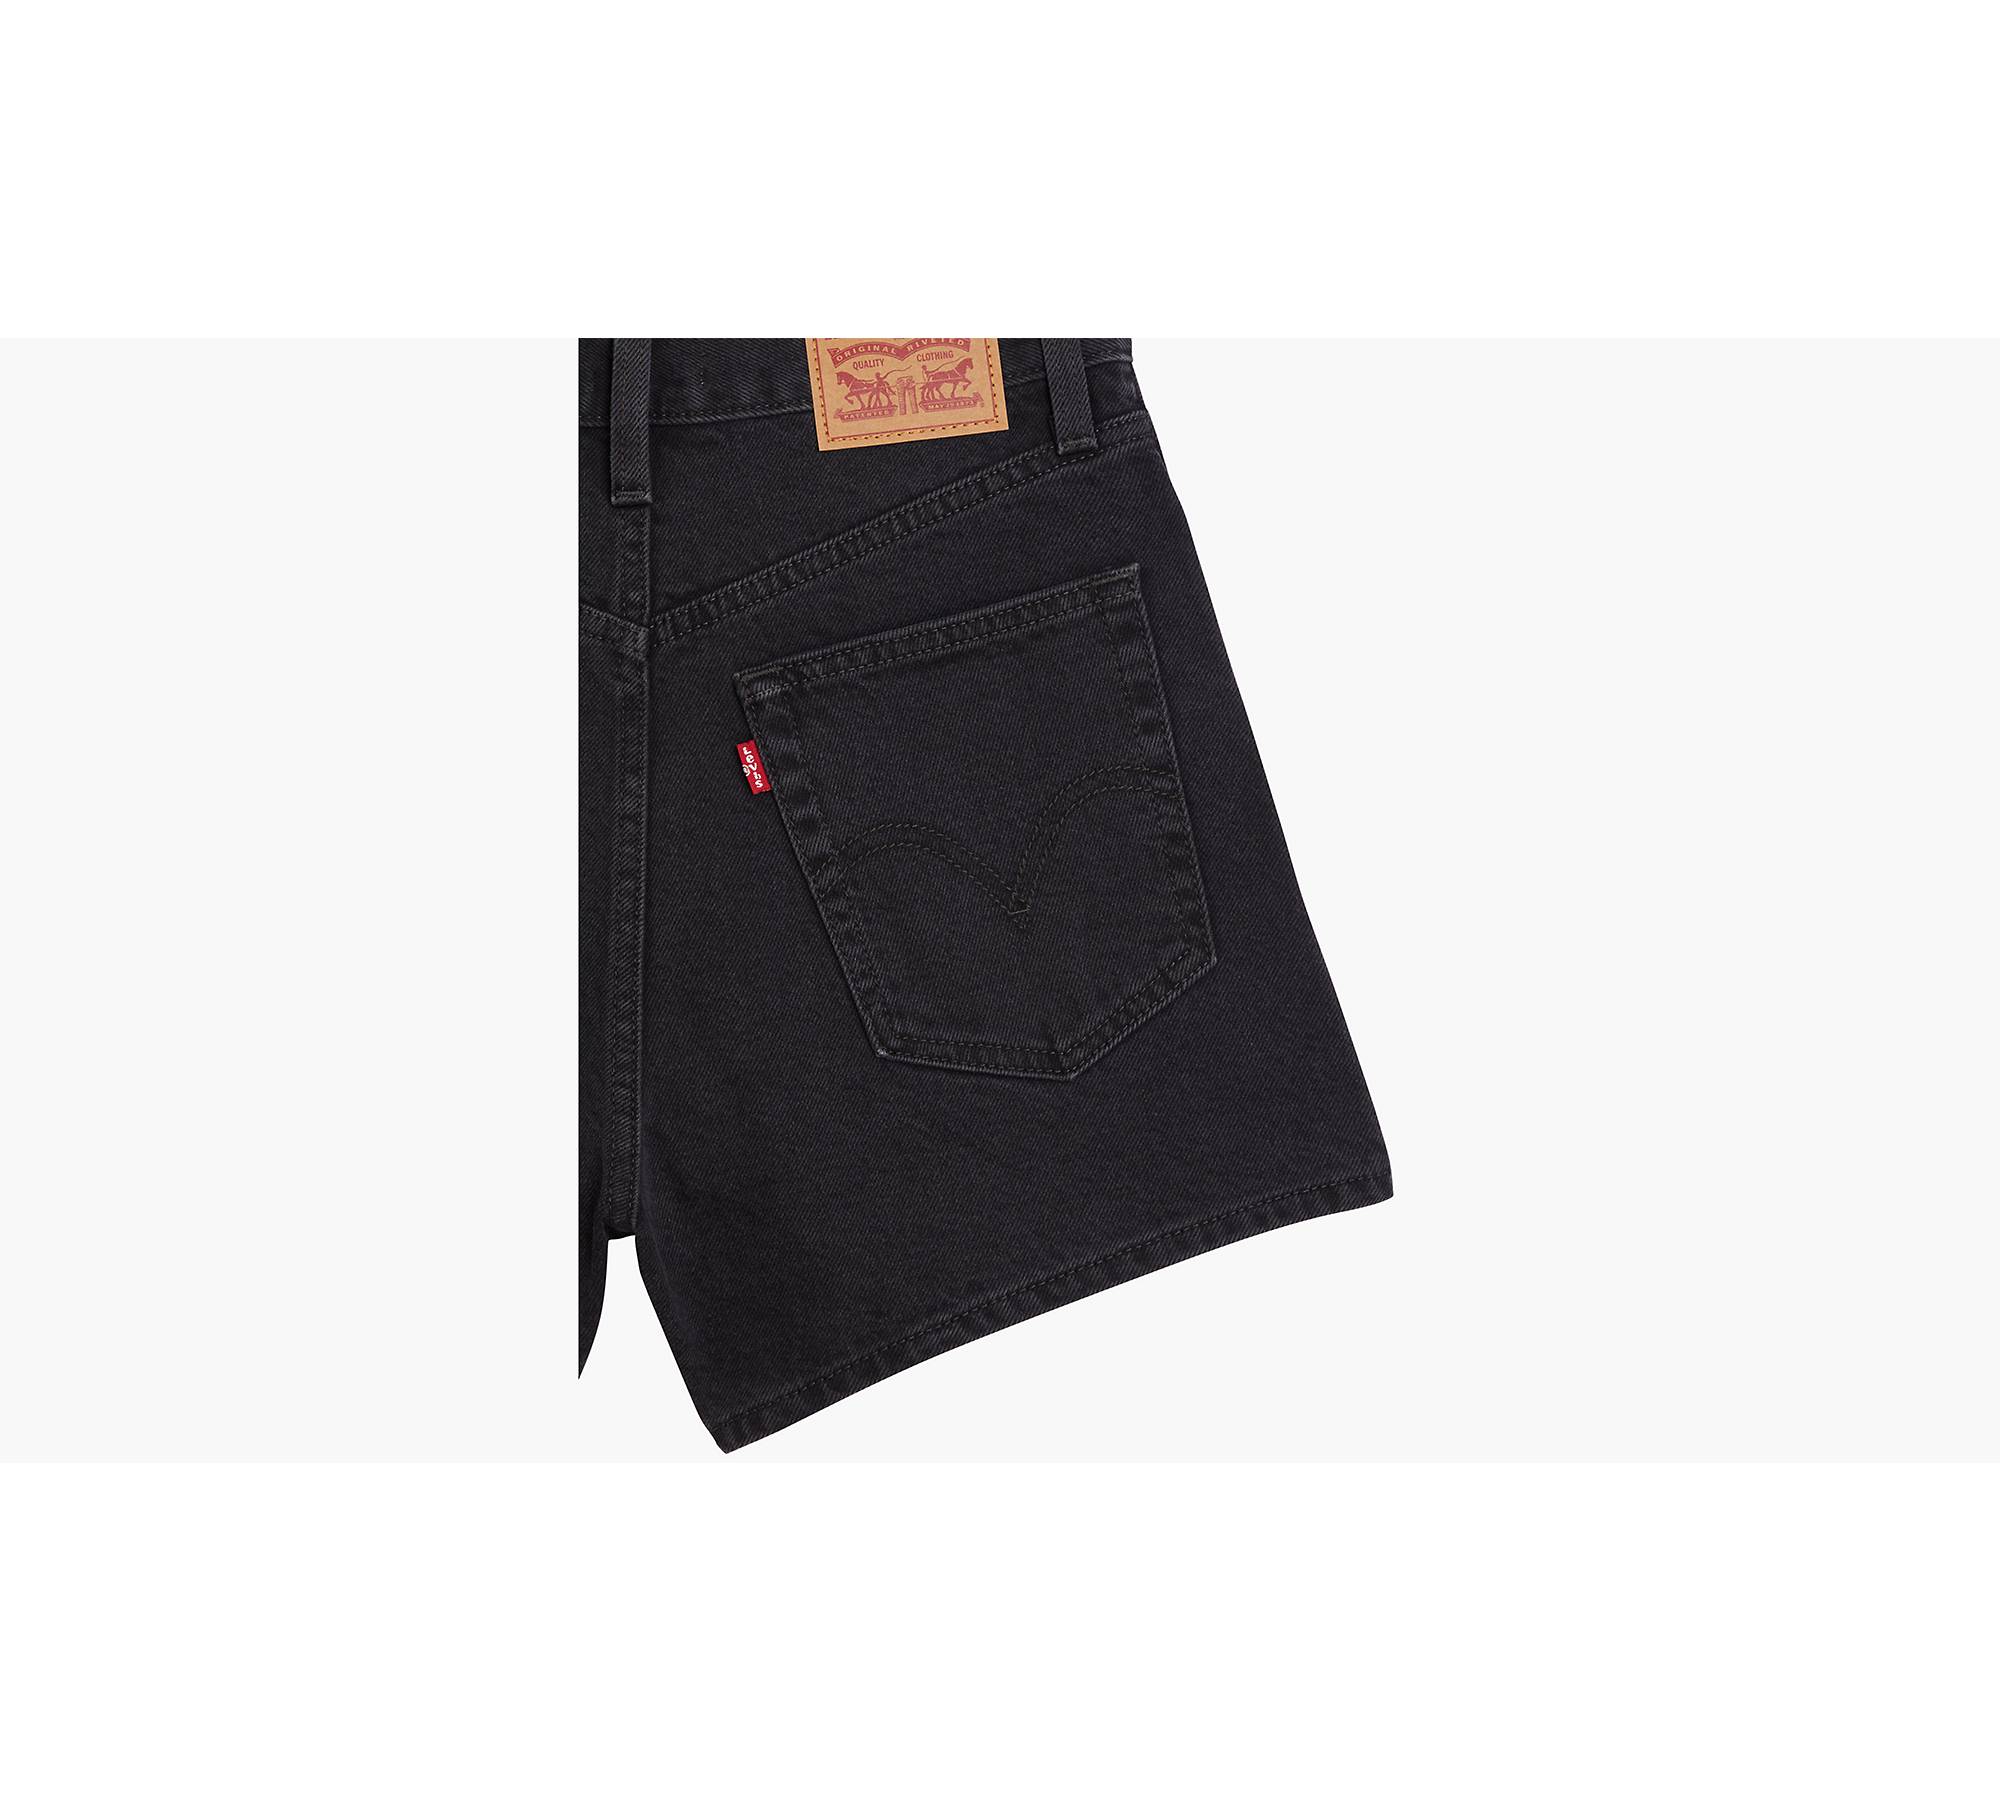 Levi's High Waisted Mom A Line Jean Shorts in Wonderful Black Size